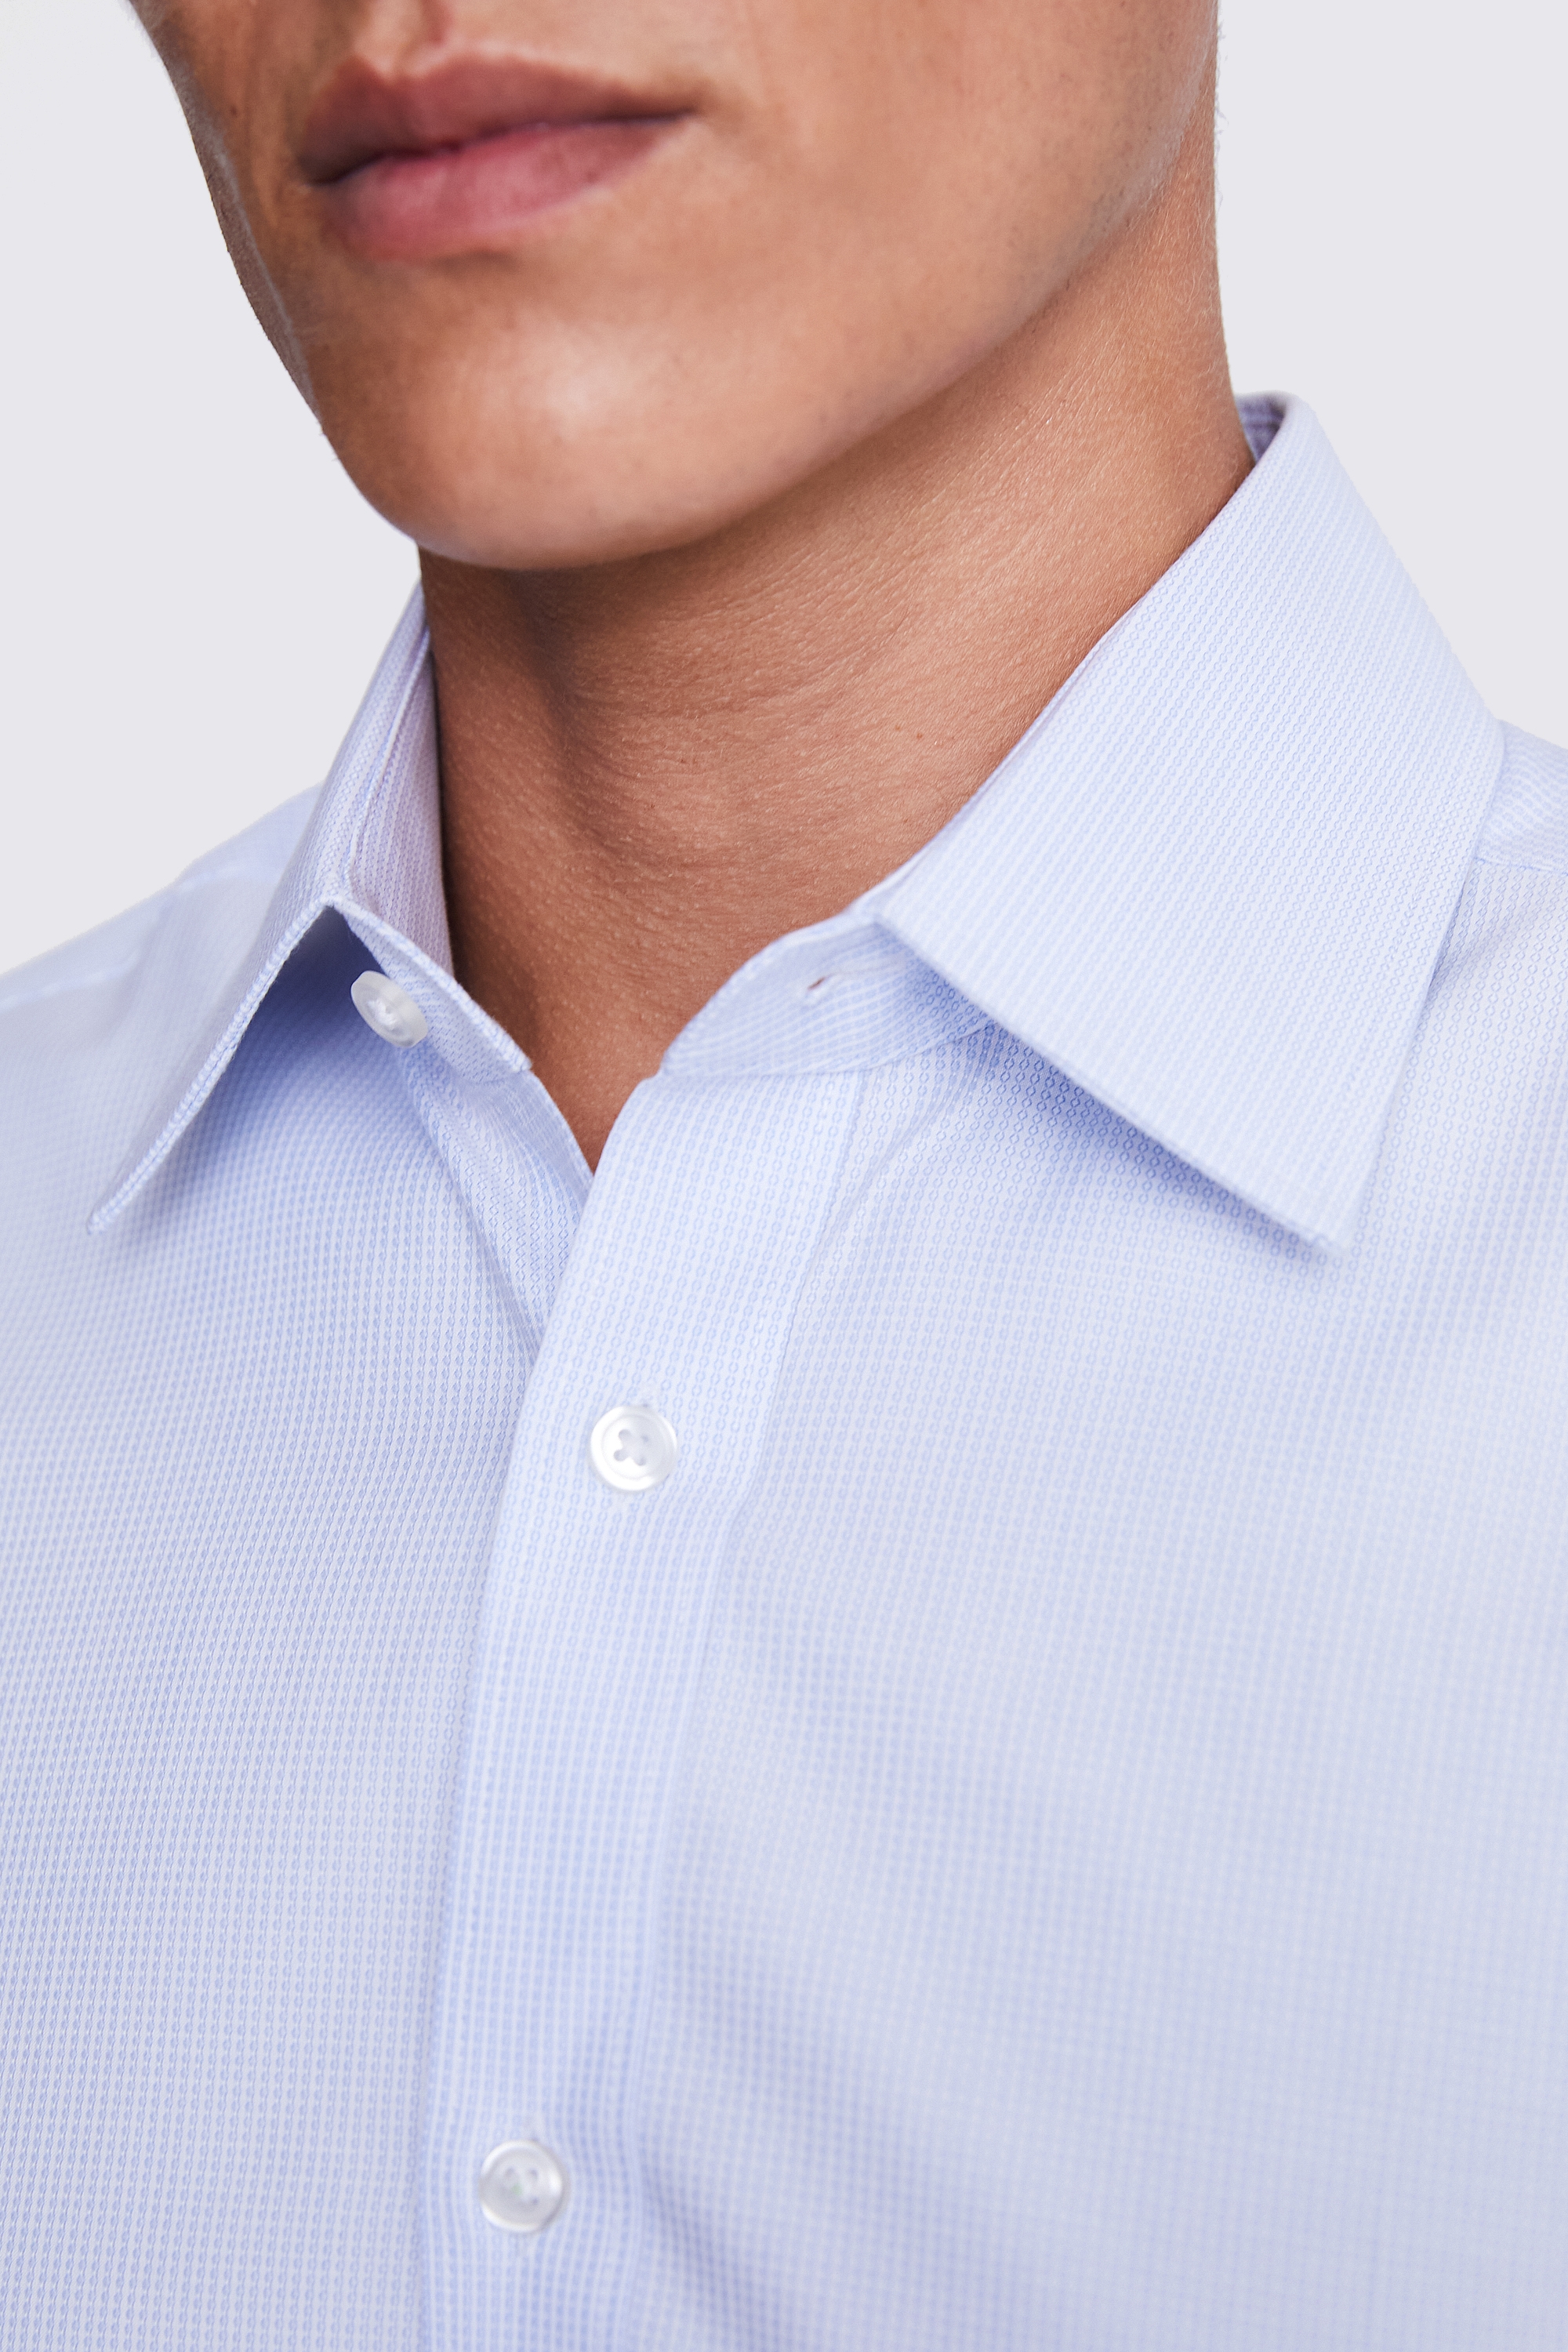 Tailored Fit Sky Dobby Shirt | Buy Online at Moss